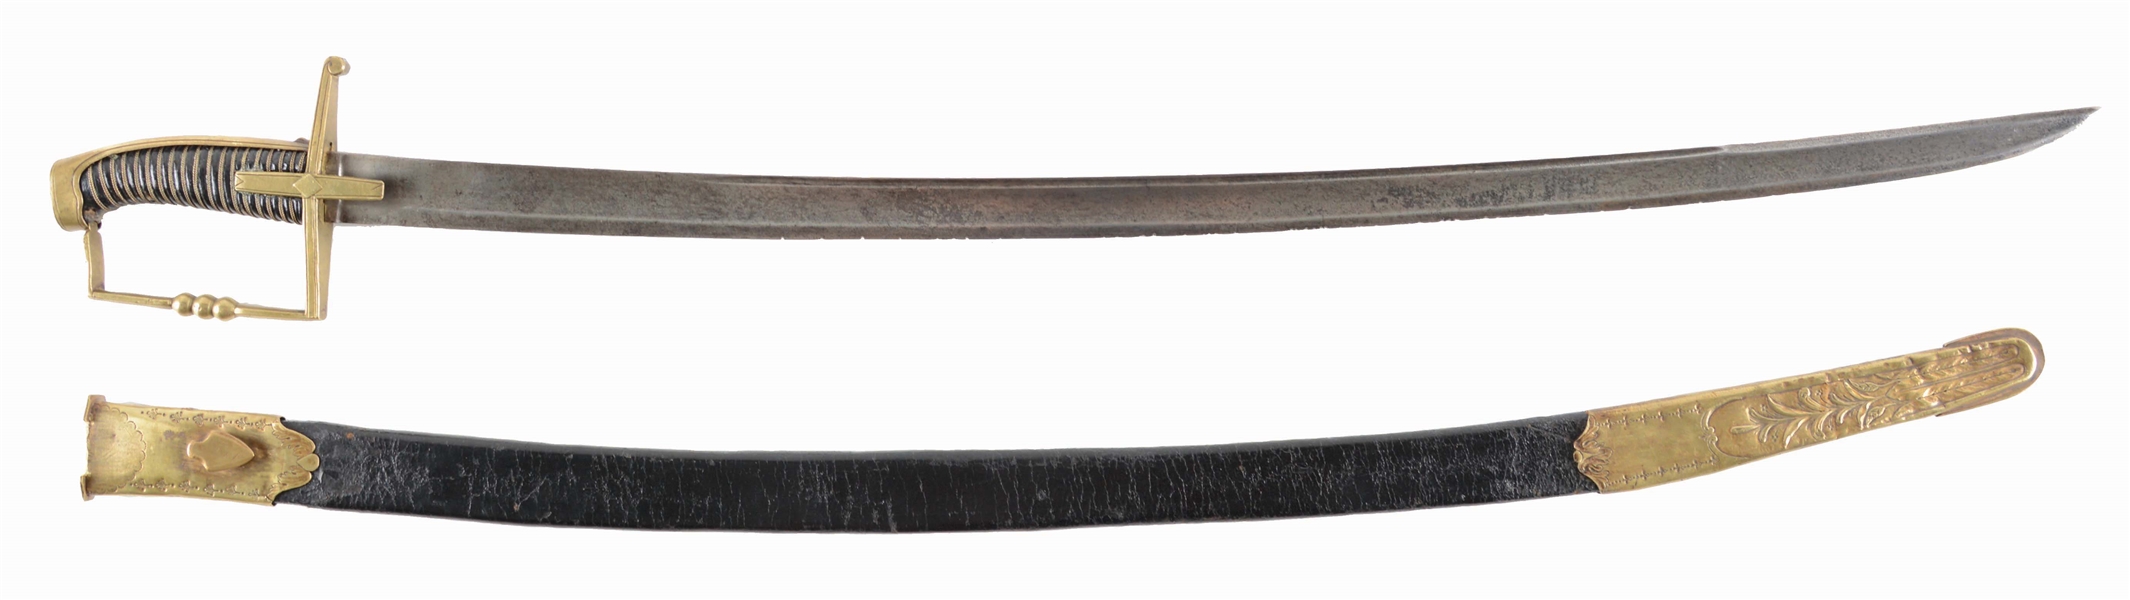 HISTORIC REVOLUTIONARY WAR STIRRUP HILT CALVALRY SABER WITH SCABBARD ATTRIBUTED TO MAJOR JOHN PARR.